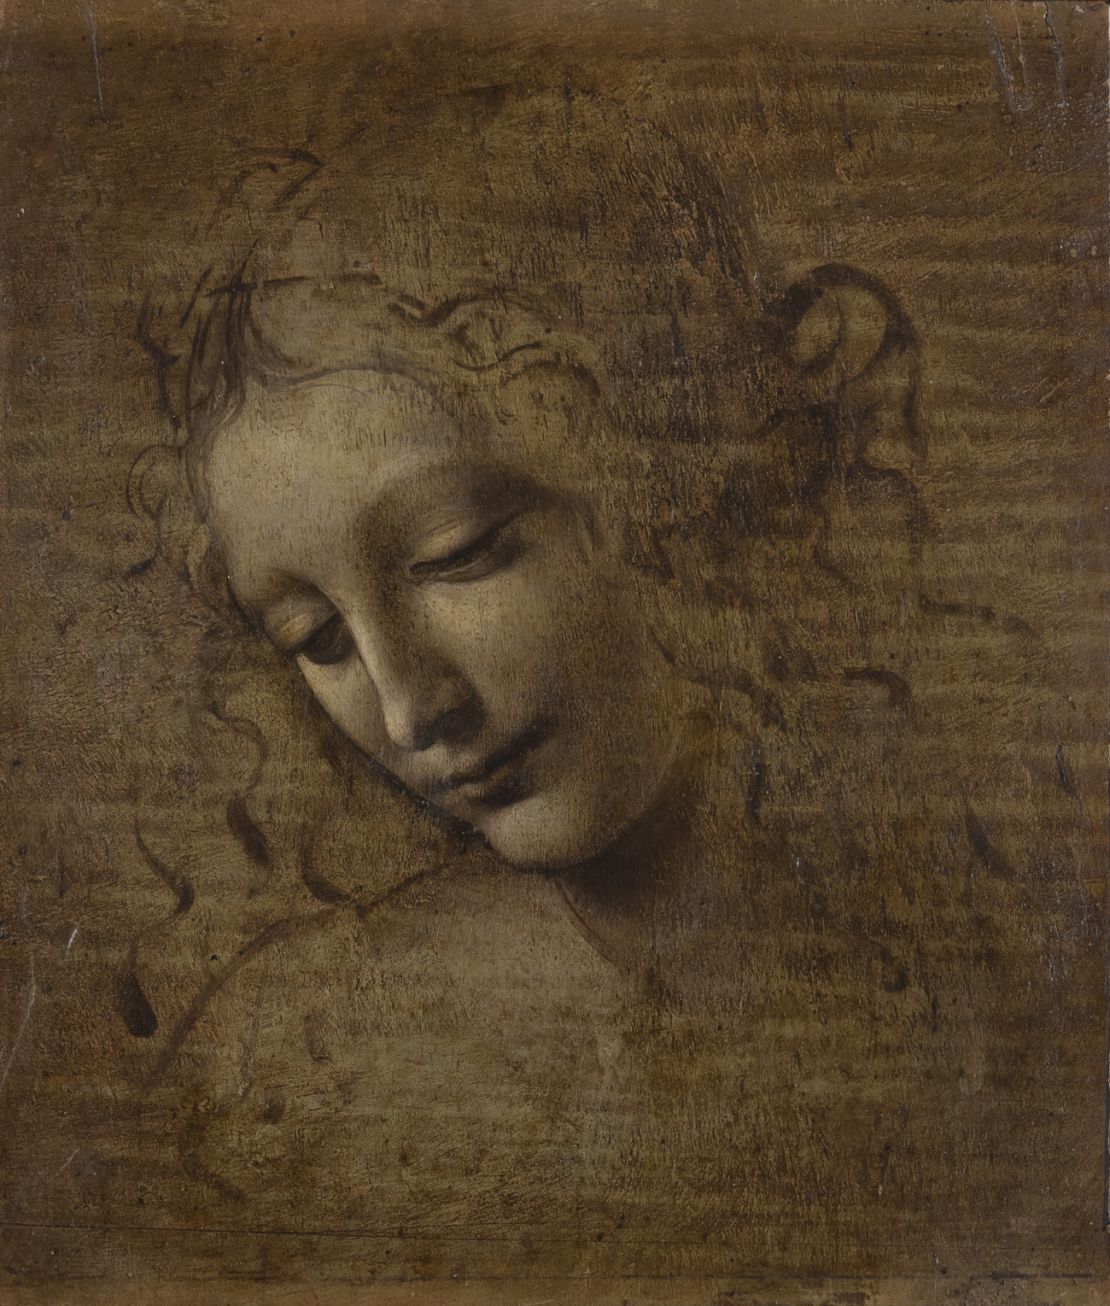 Head of a Woman (Las Scapigliata) is unfinished, like many other Leonardo works.